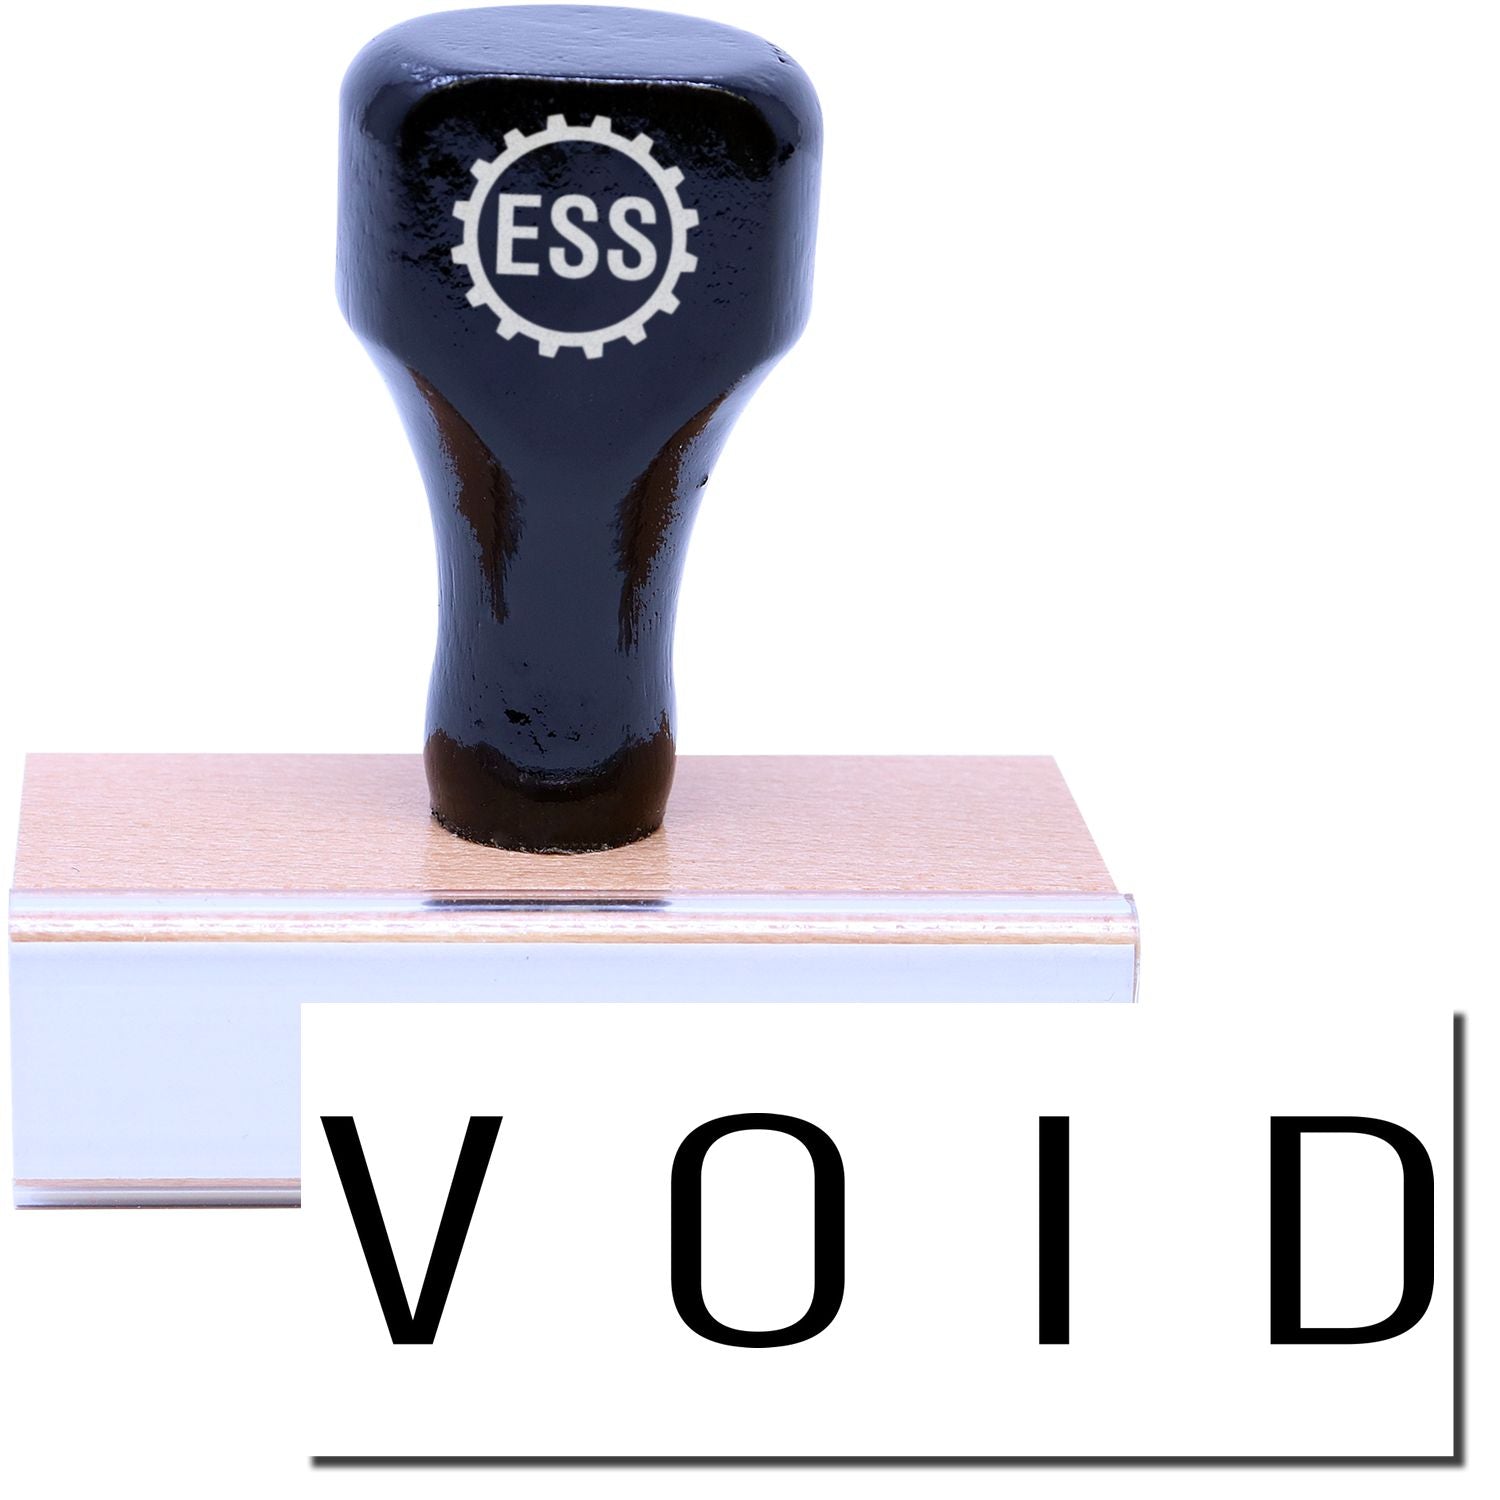 A stock office rubber stamp with a stamped image showing how the text "VOID" in a large narrow font is displayed after stamping.